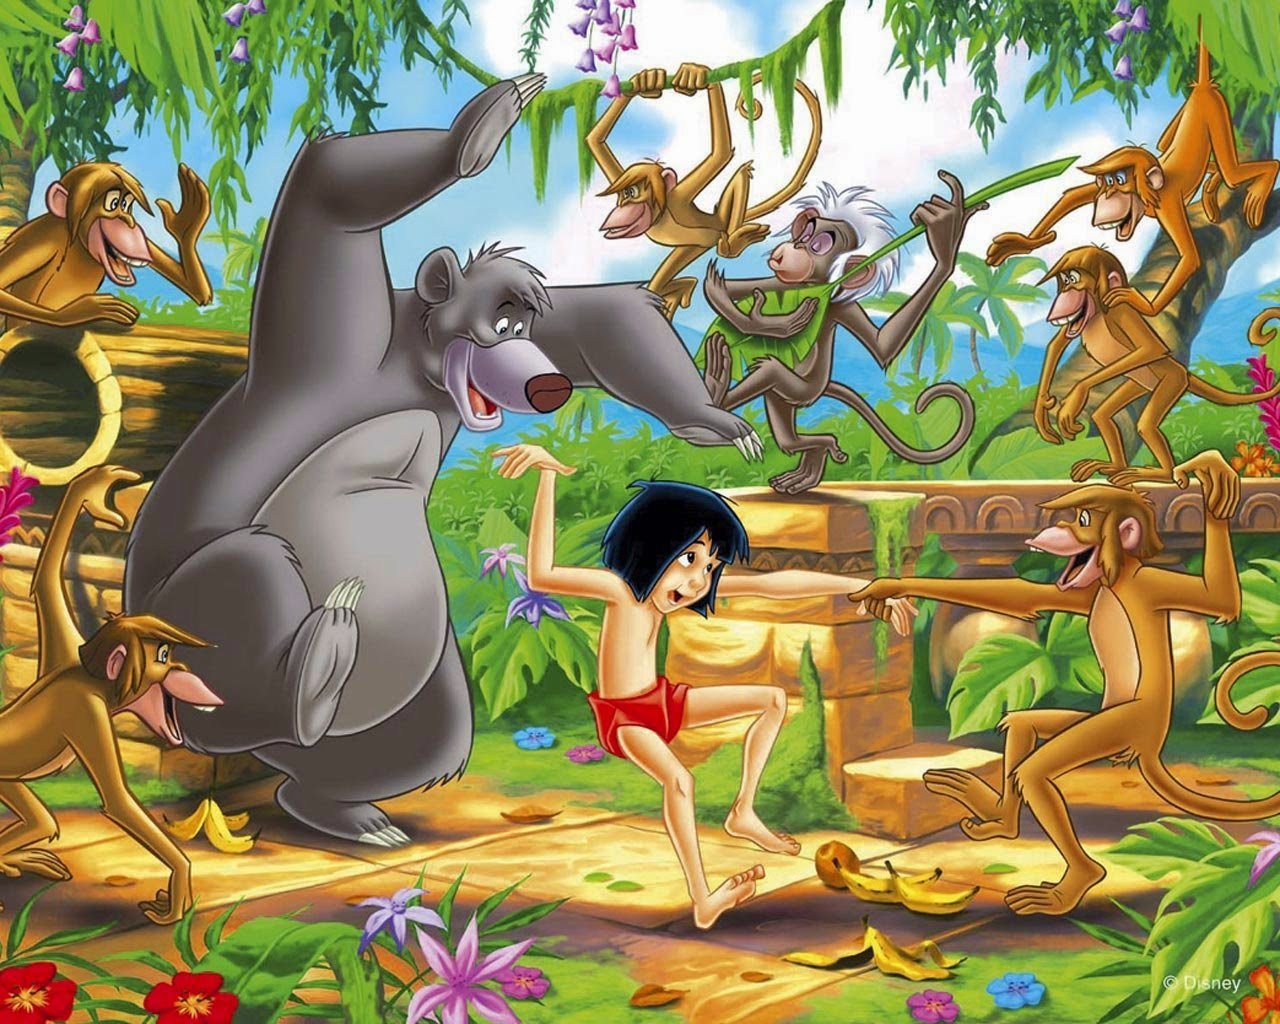 Comic Frontline Bill Murray Cast As Baloo The Bear In The Jungle Book.